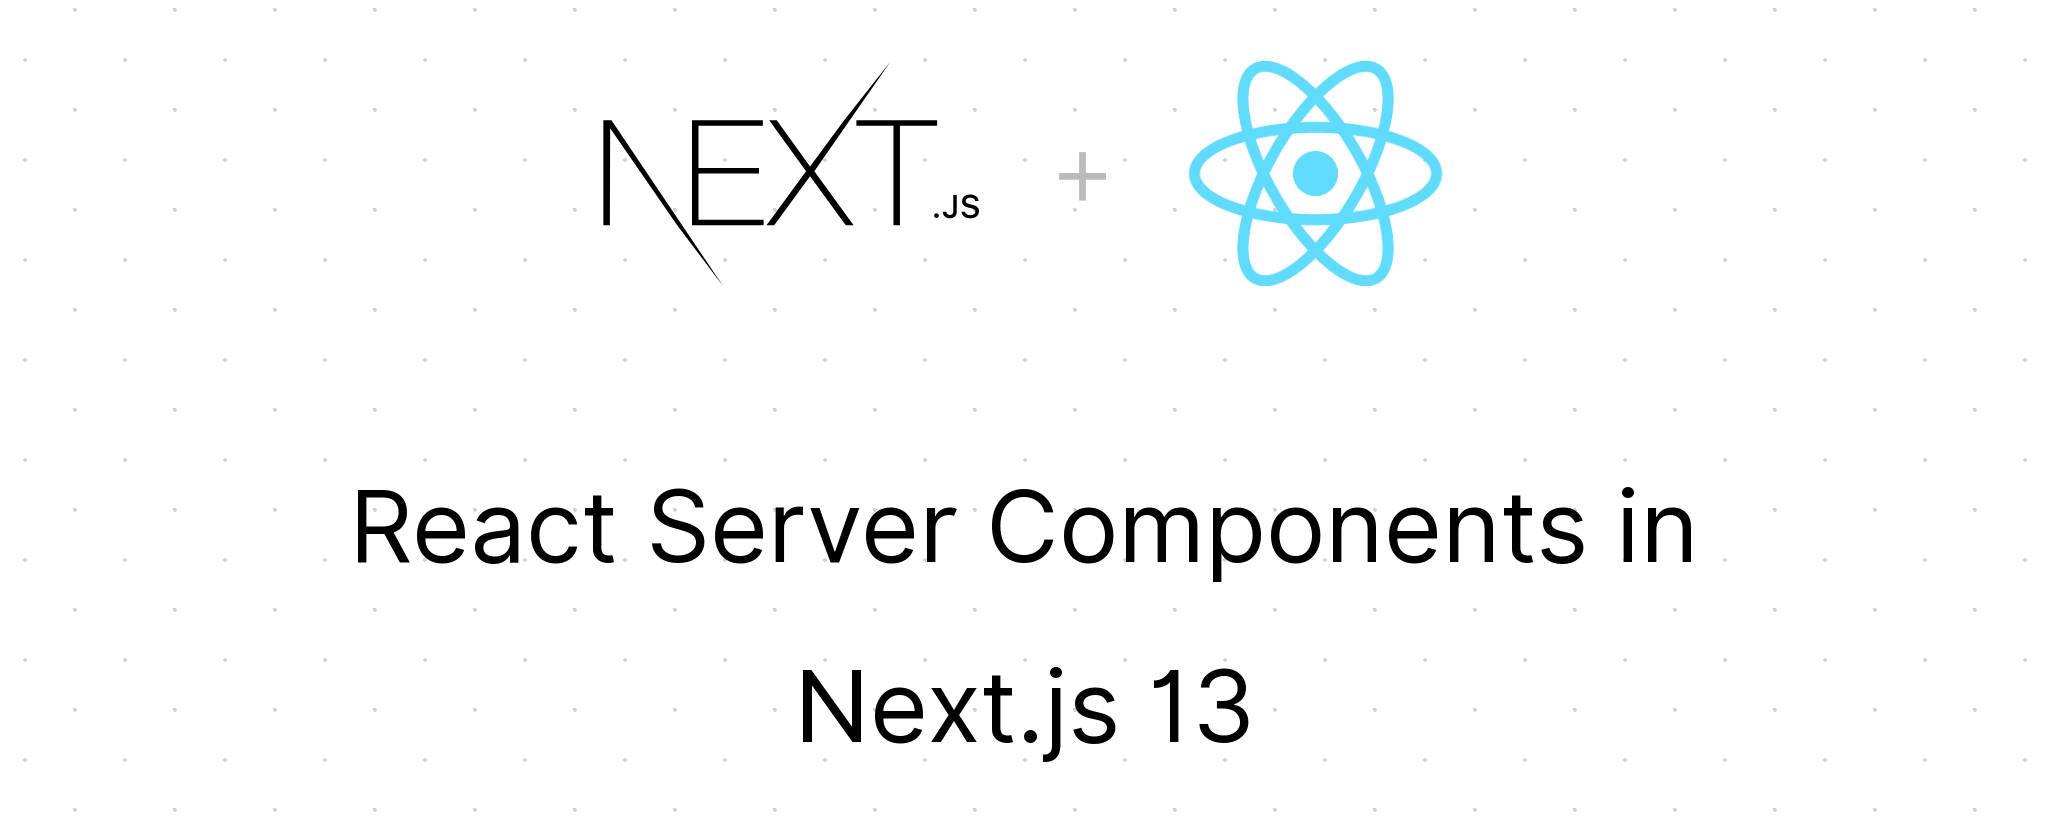 Next.js Logo and React Logo with text React Server Components in Next.js 13